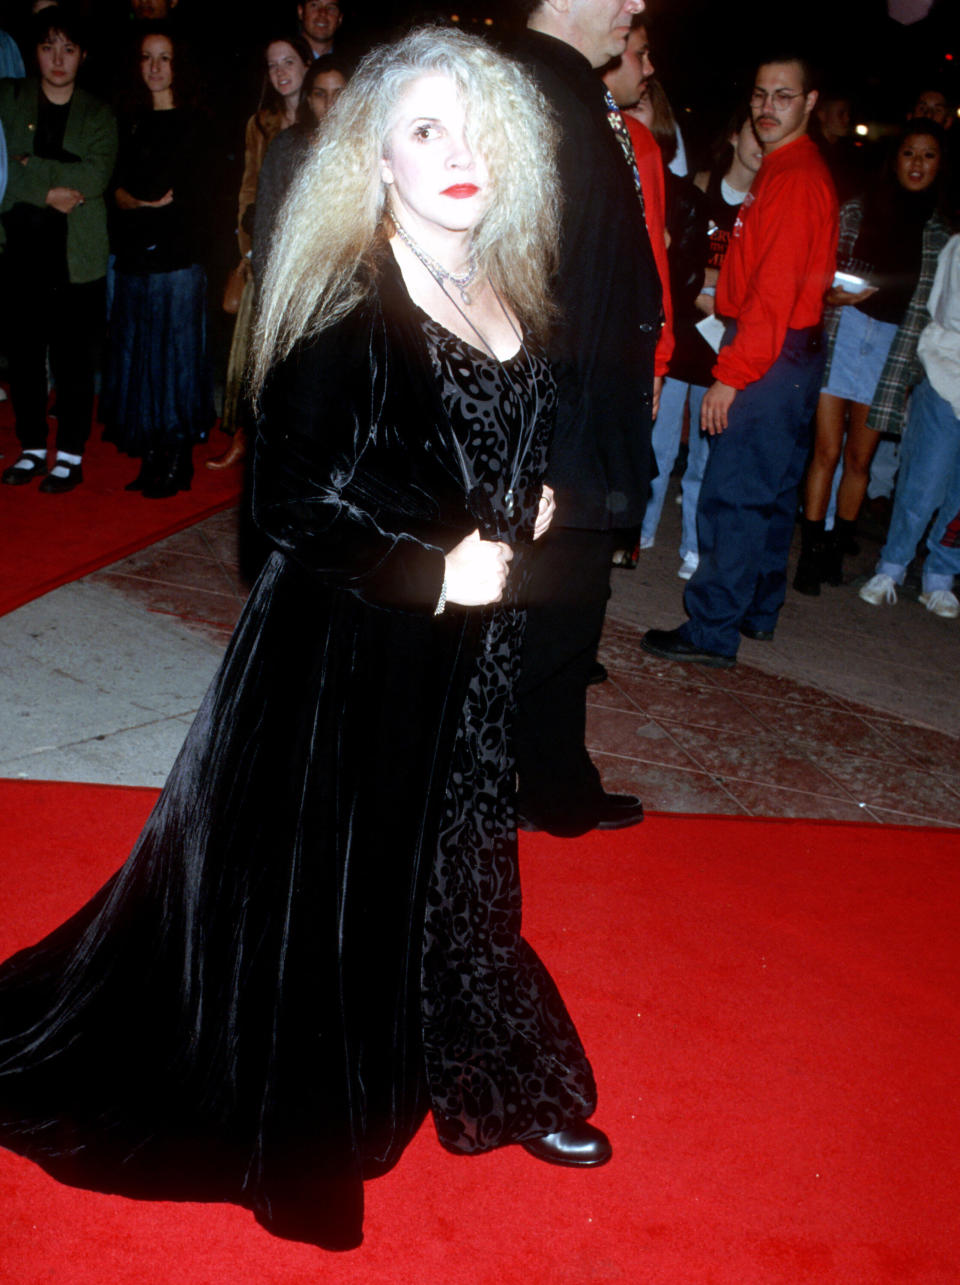 Nicks at the Los Angeles premiere of "Interview with the Vampire" in 1994.